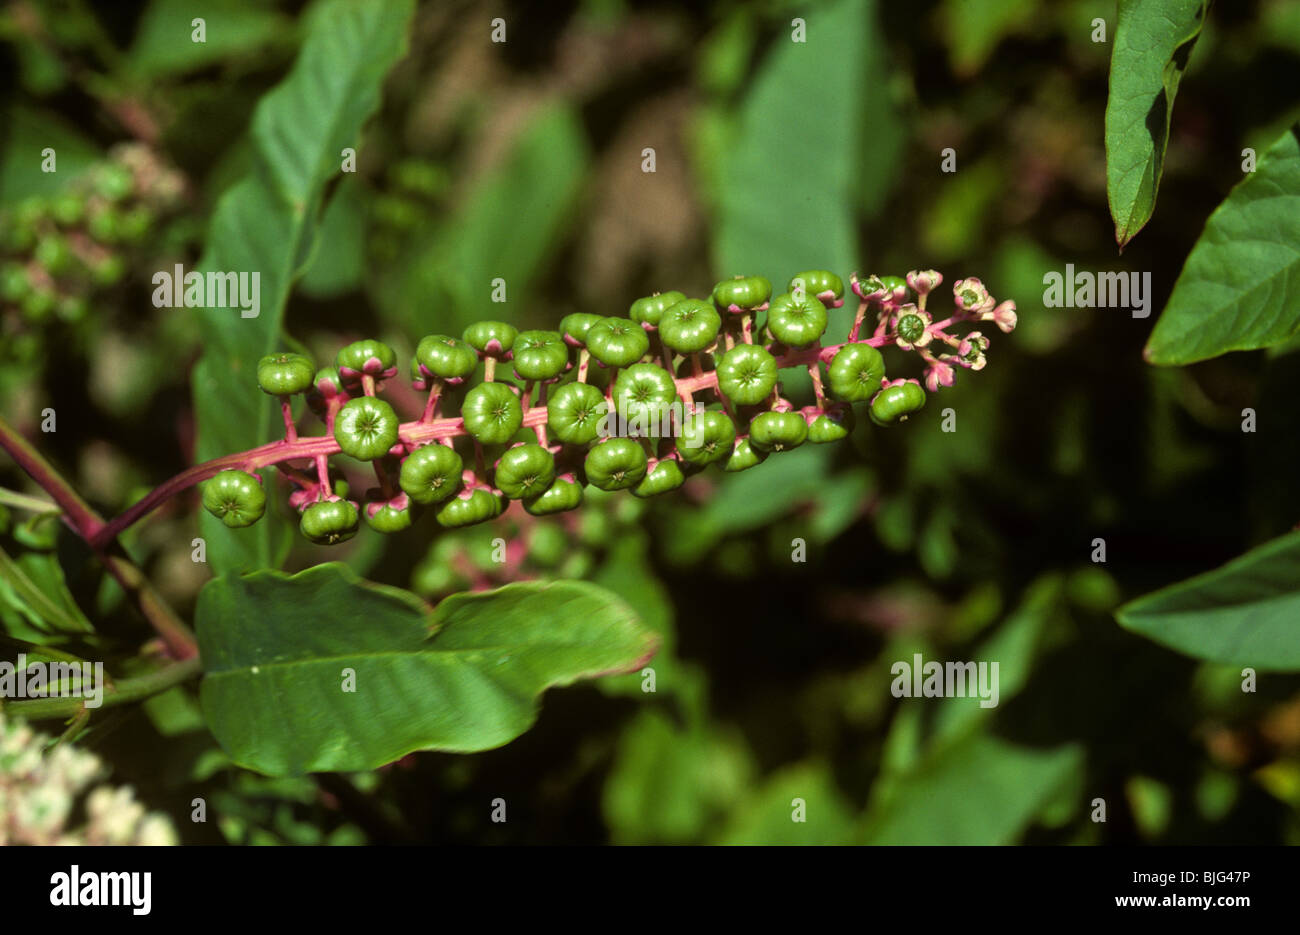 Pokeweed (Phytolacca americana) plant in flower and seeding, France Stock Photo